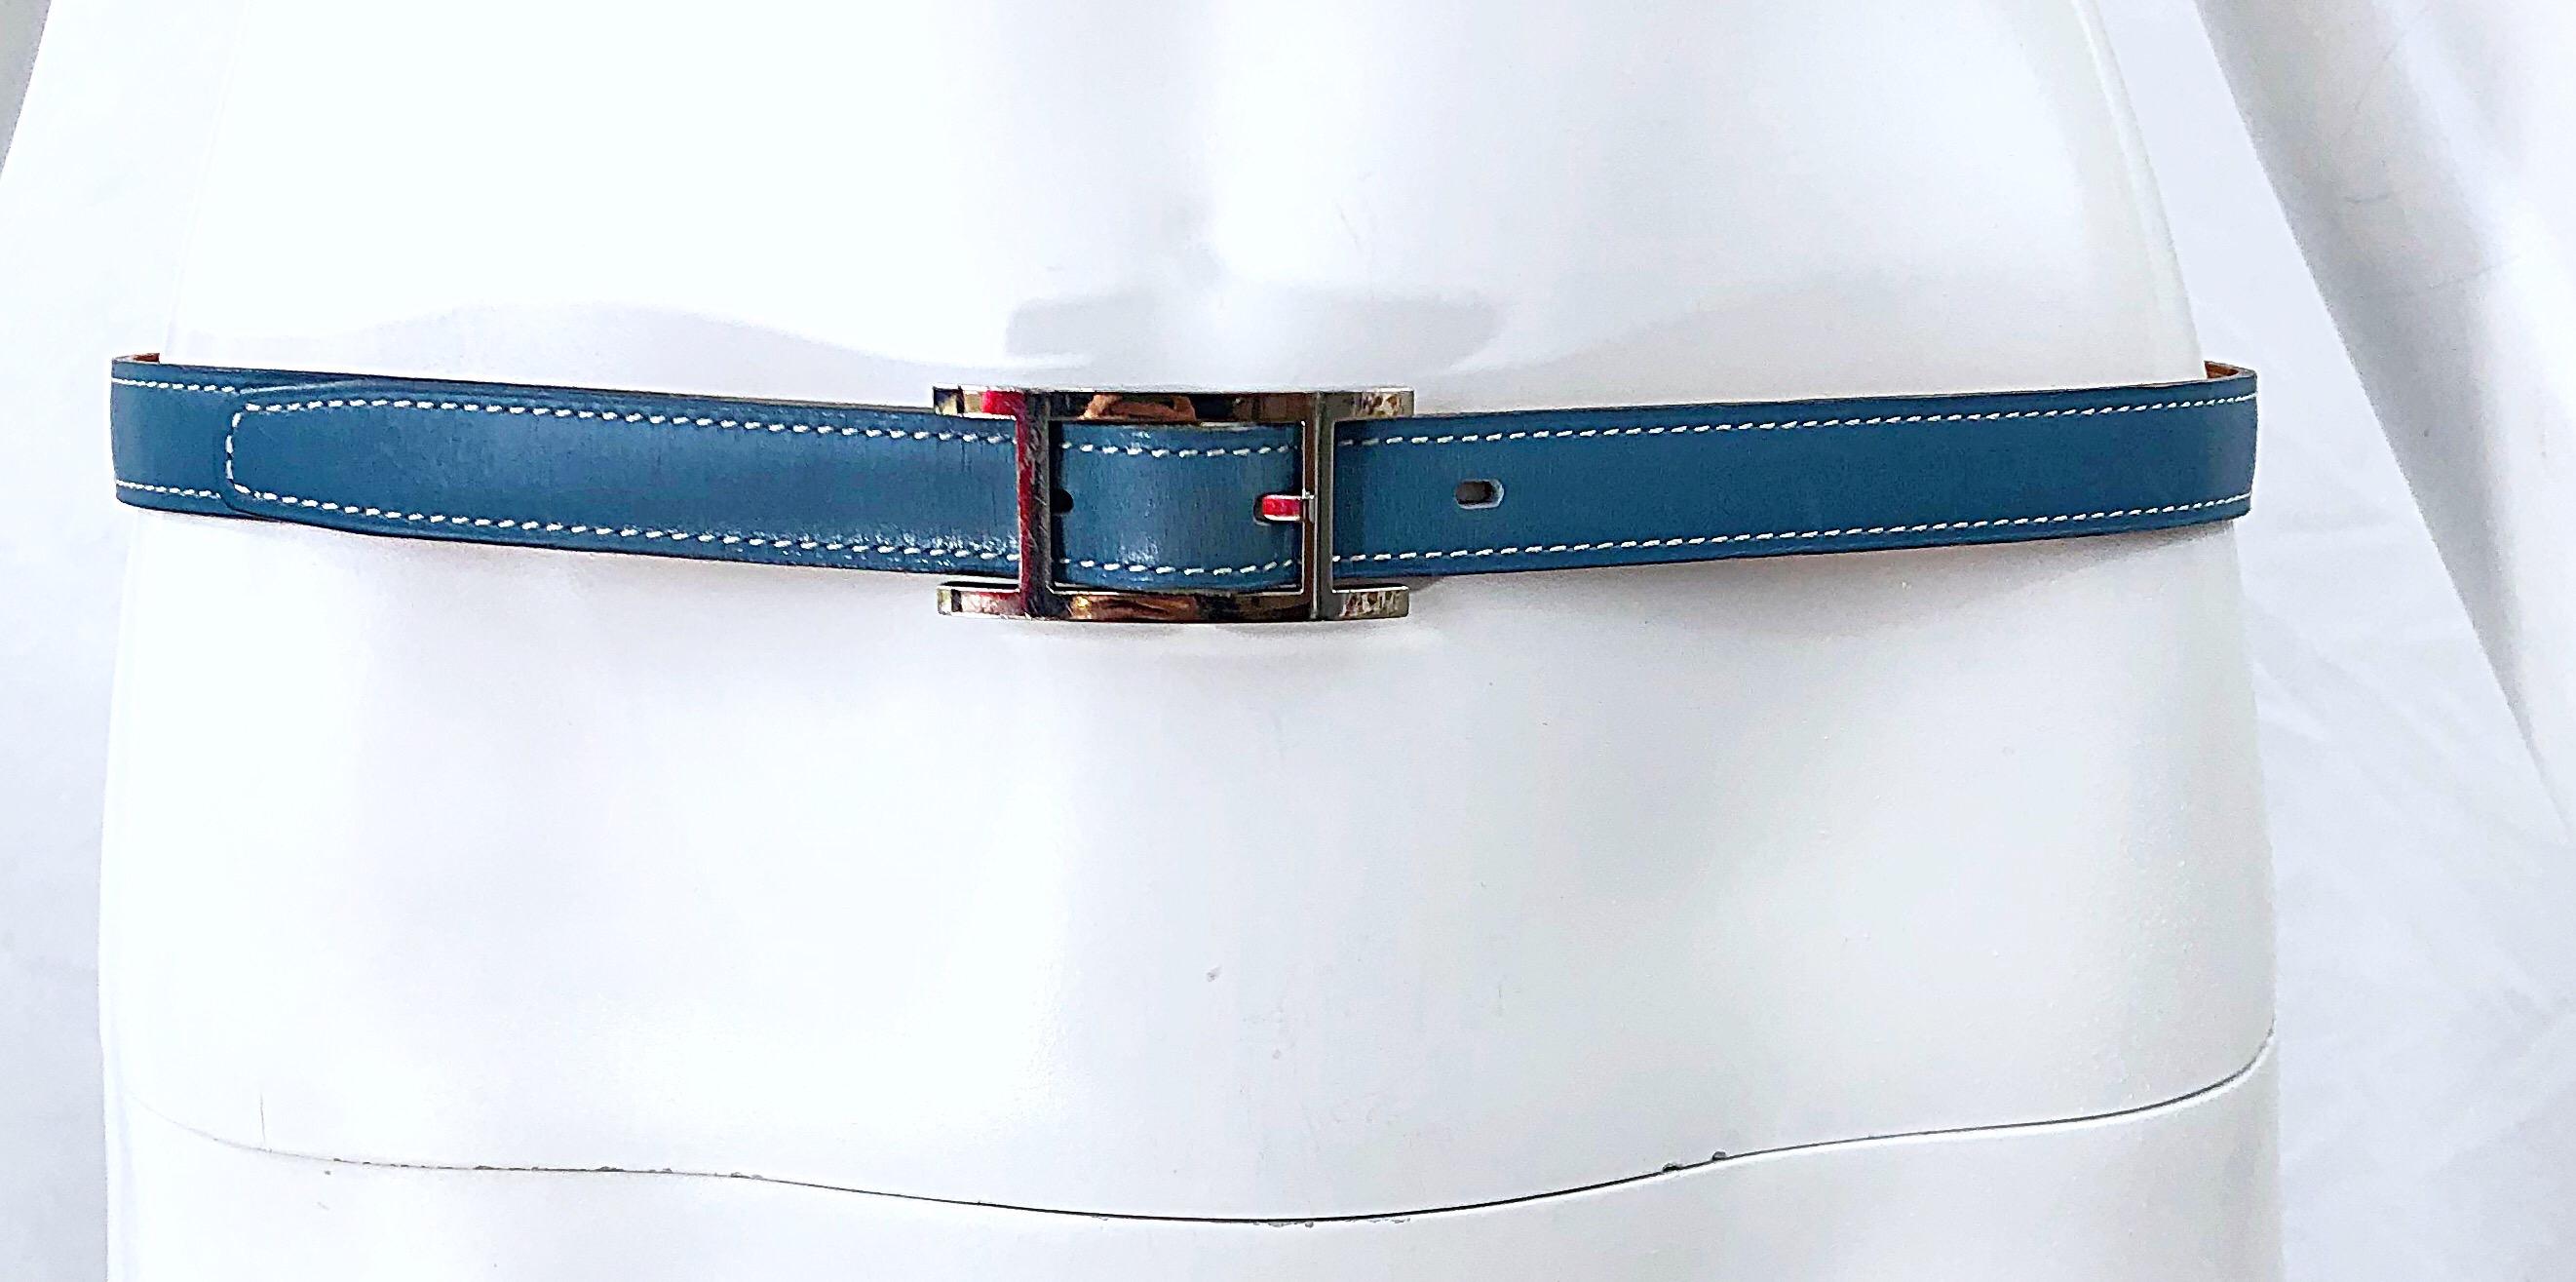 Timeless and effortlessly chic women's HERMES light blue leather 'Quentin' belt ! Light blue color goes great with everything, and is perfect for year round wear. Pair with white jeans, a skirt, or over a dress or top. 
In great condition
Made in